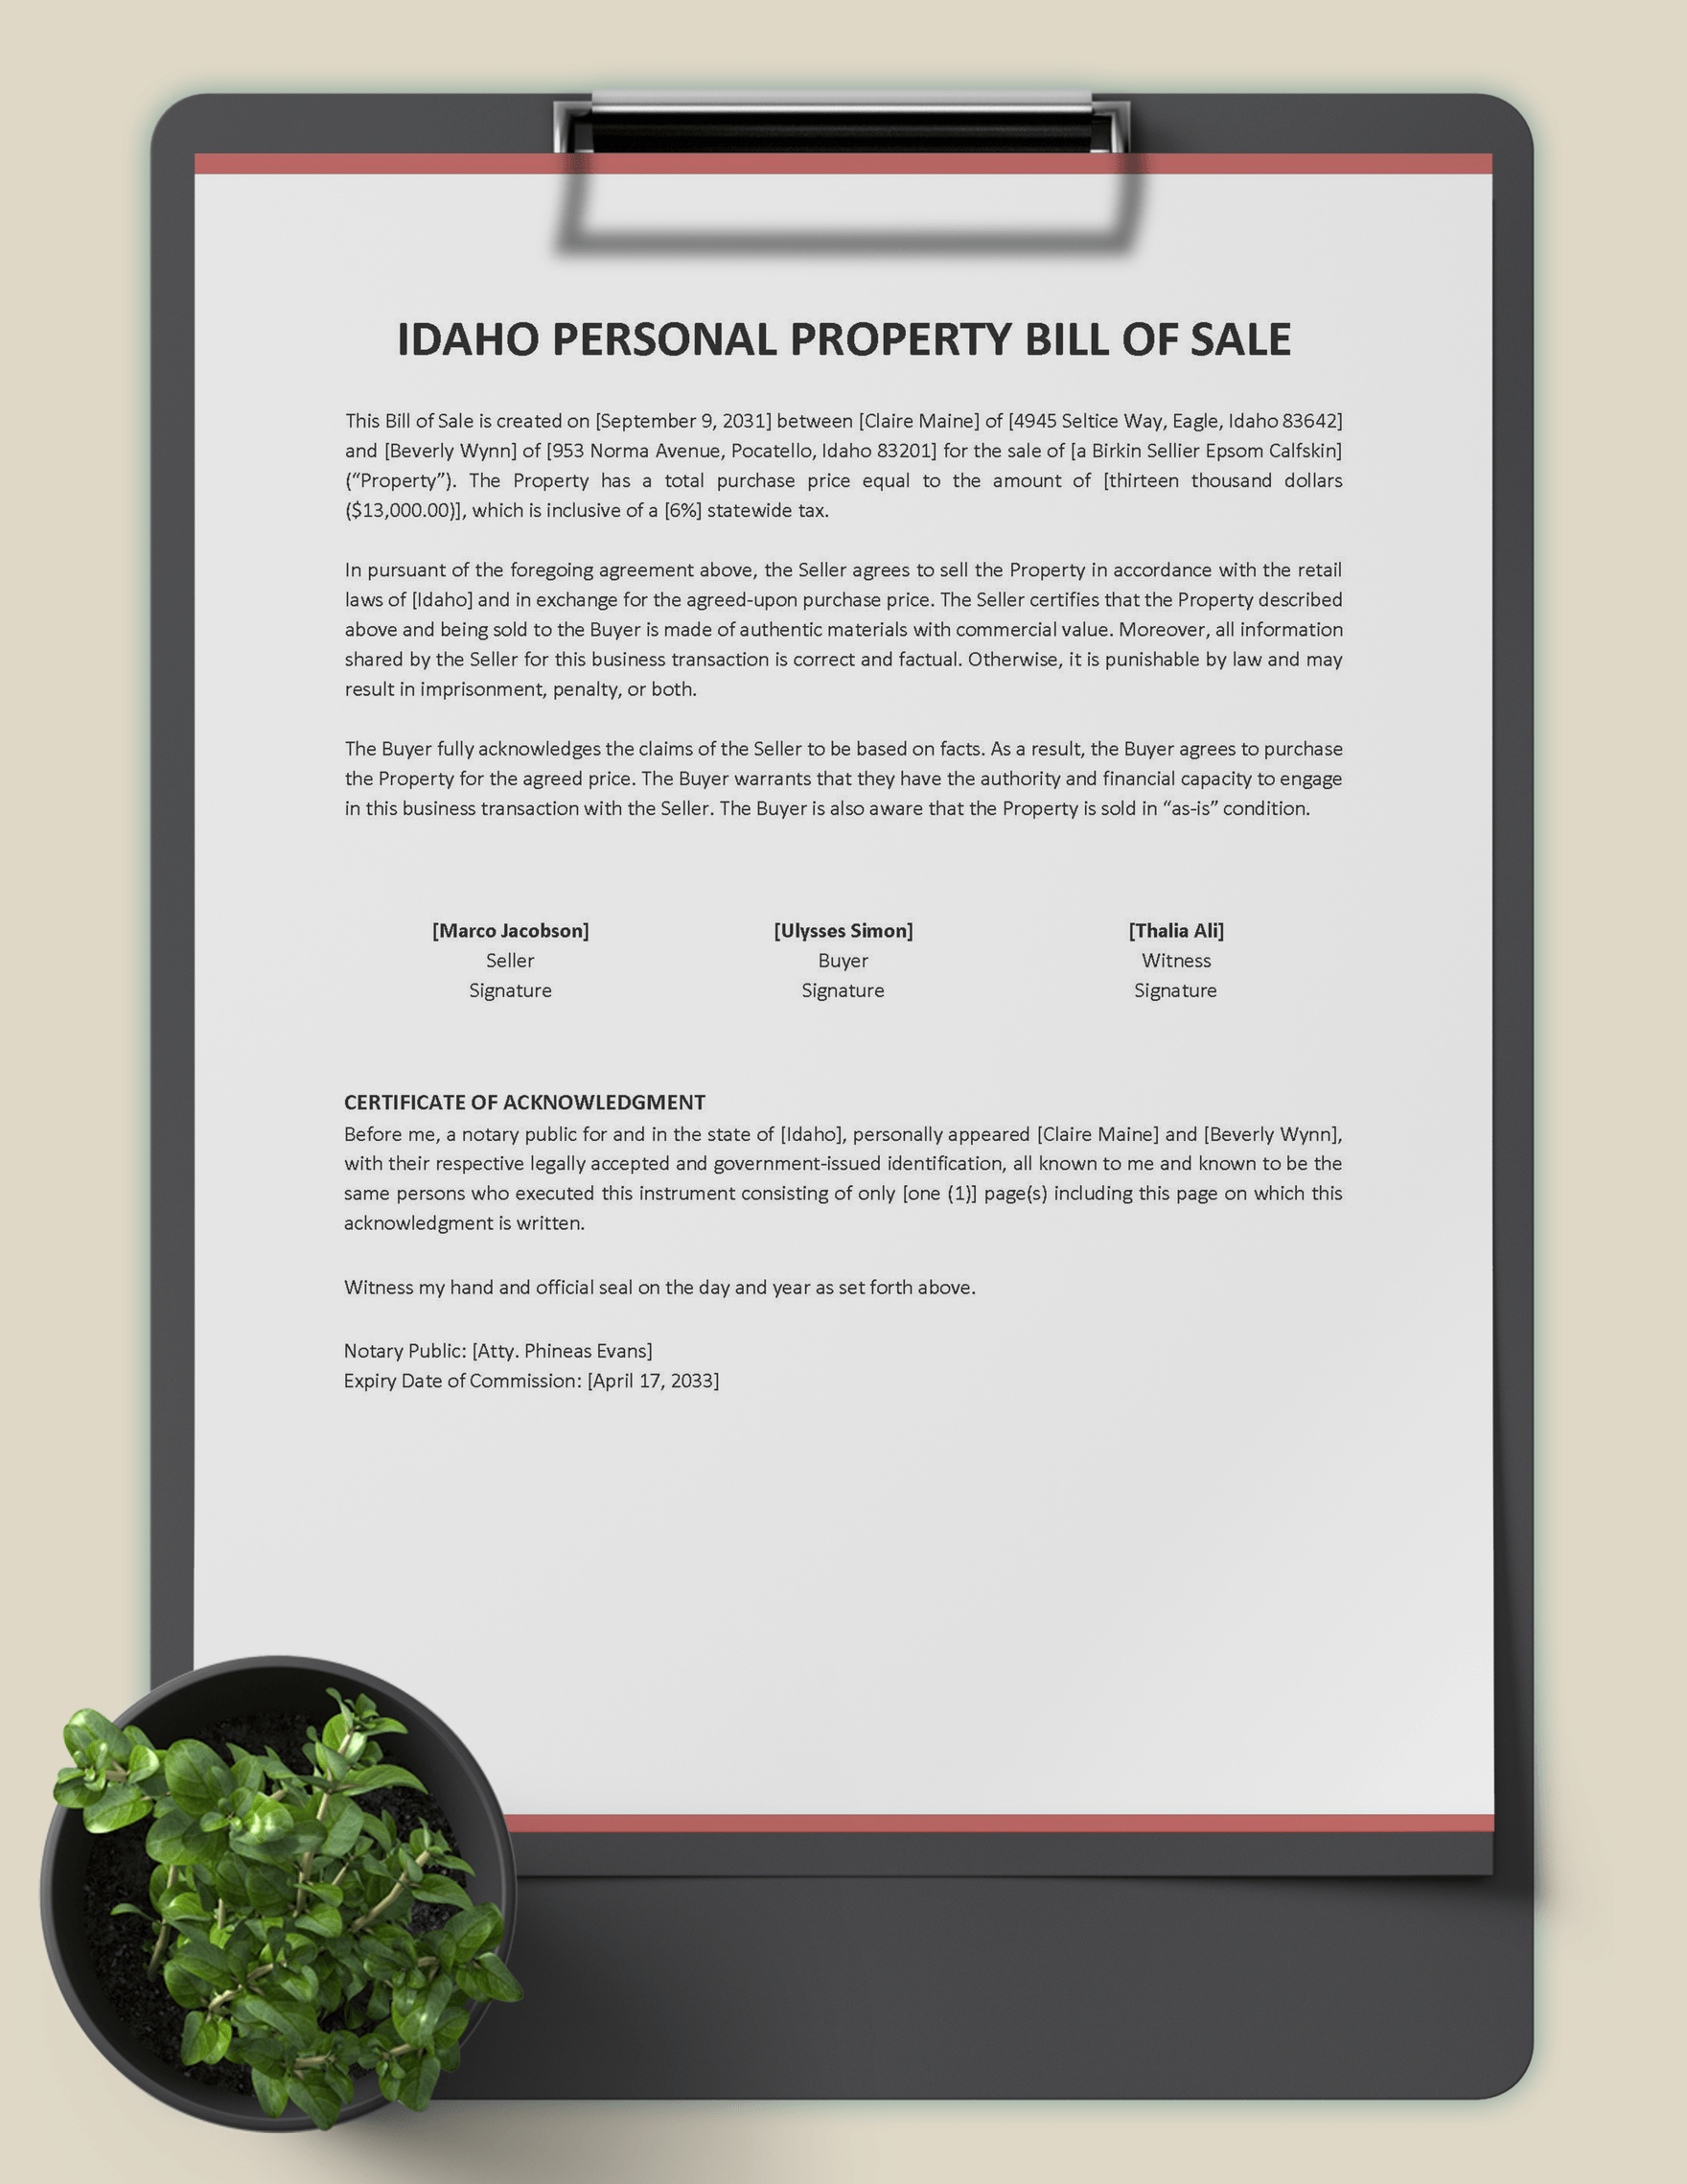 Idaho Personal Property Bill of Sale Template